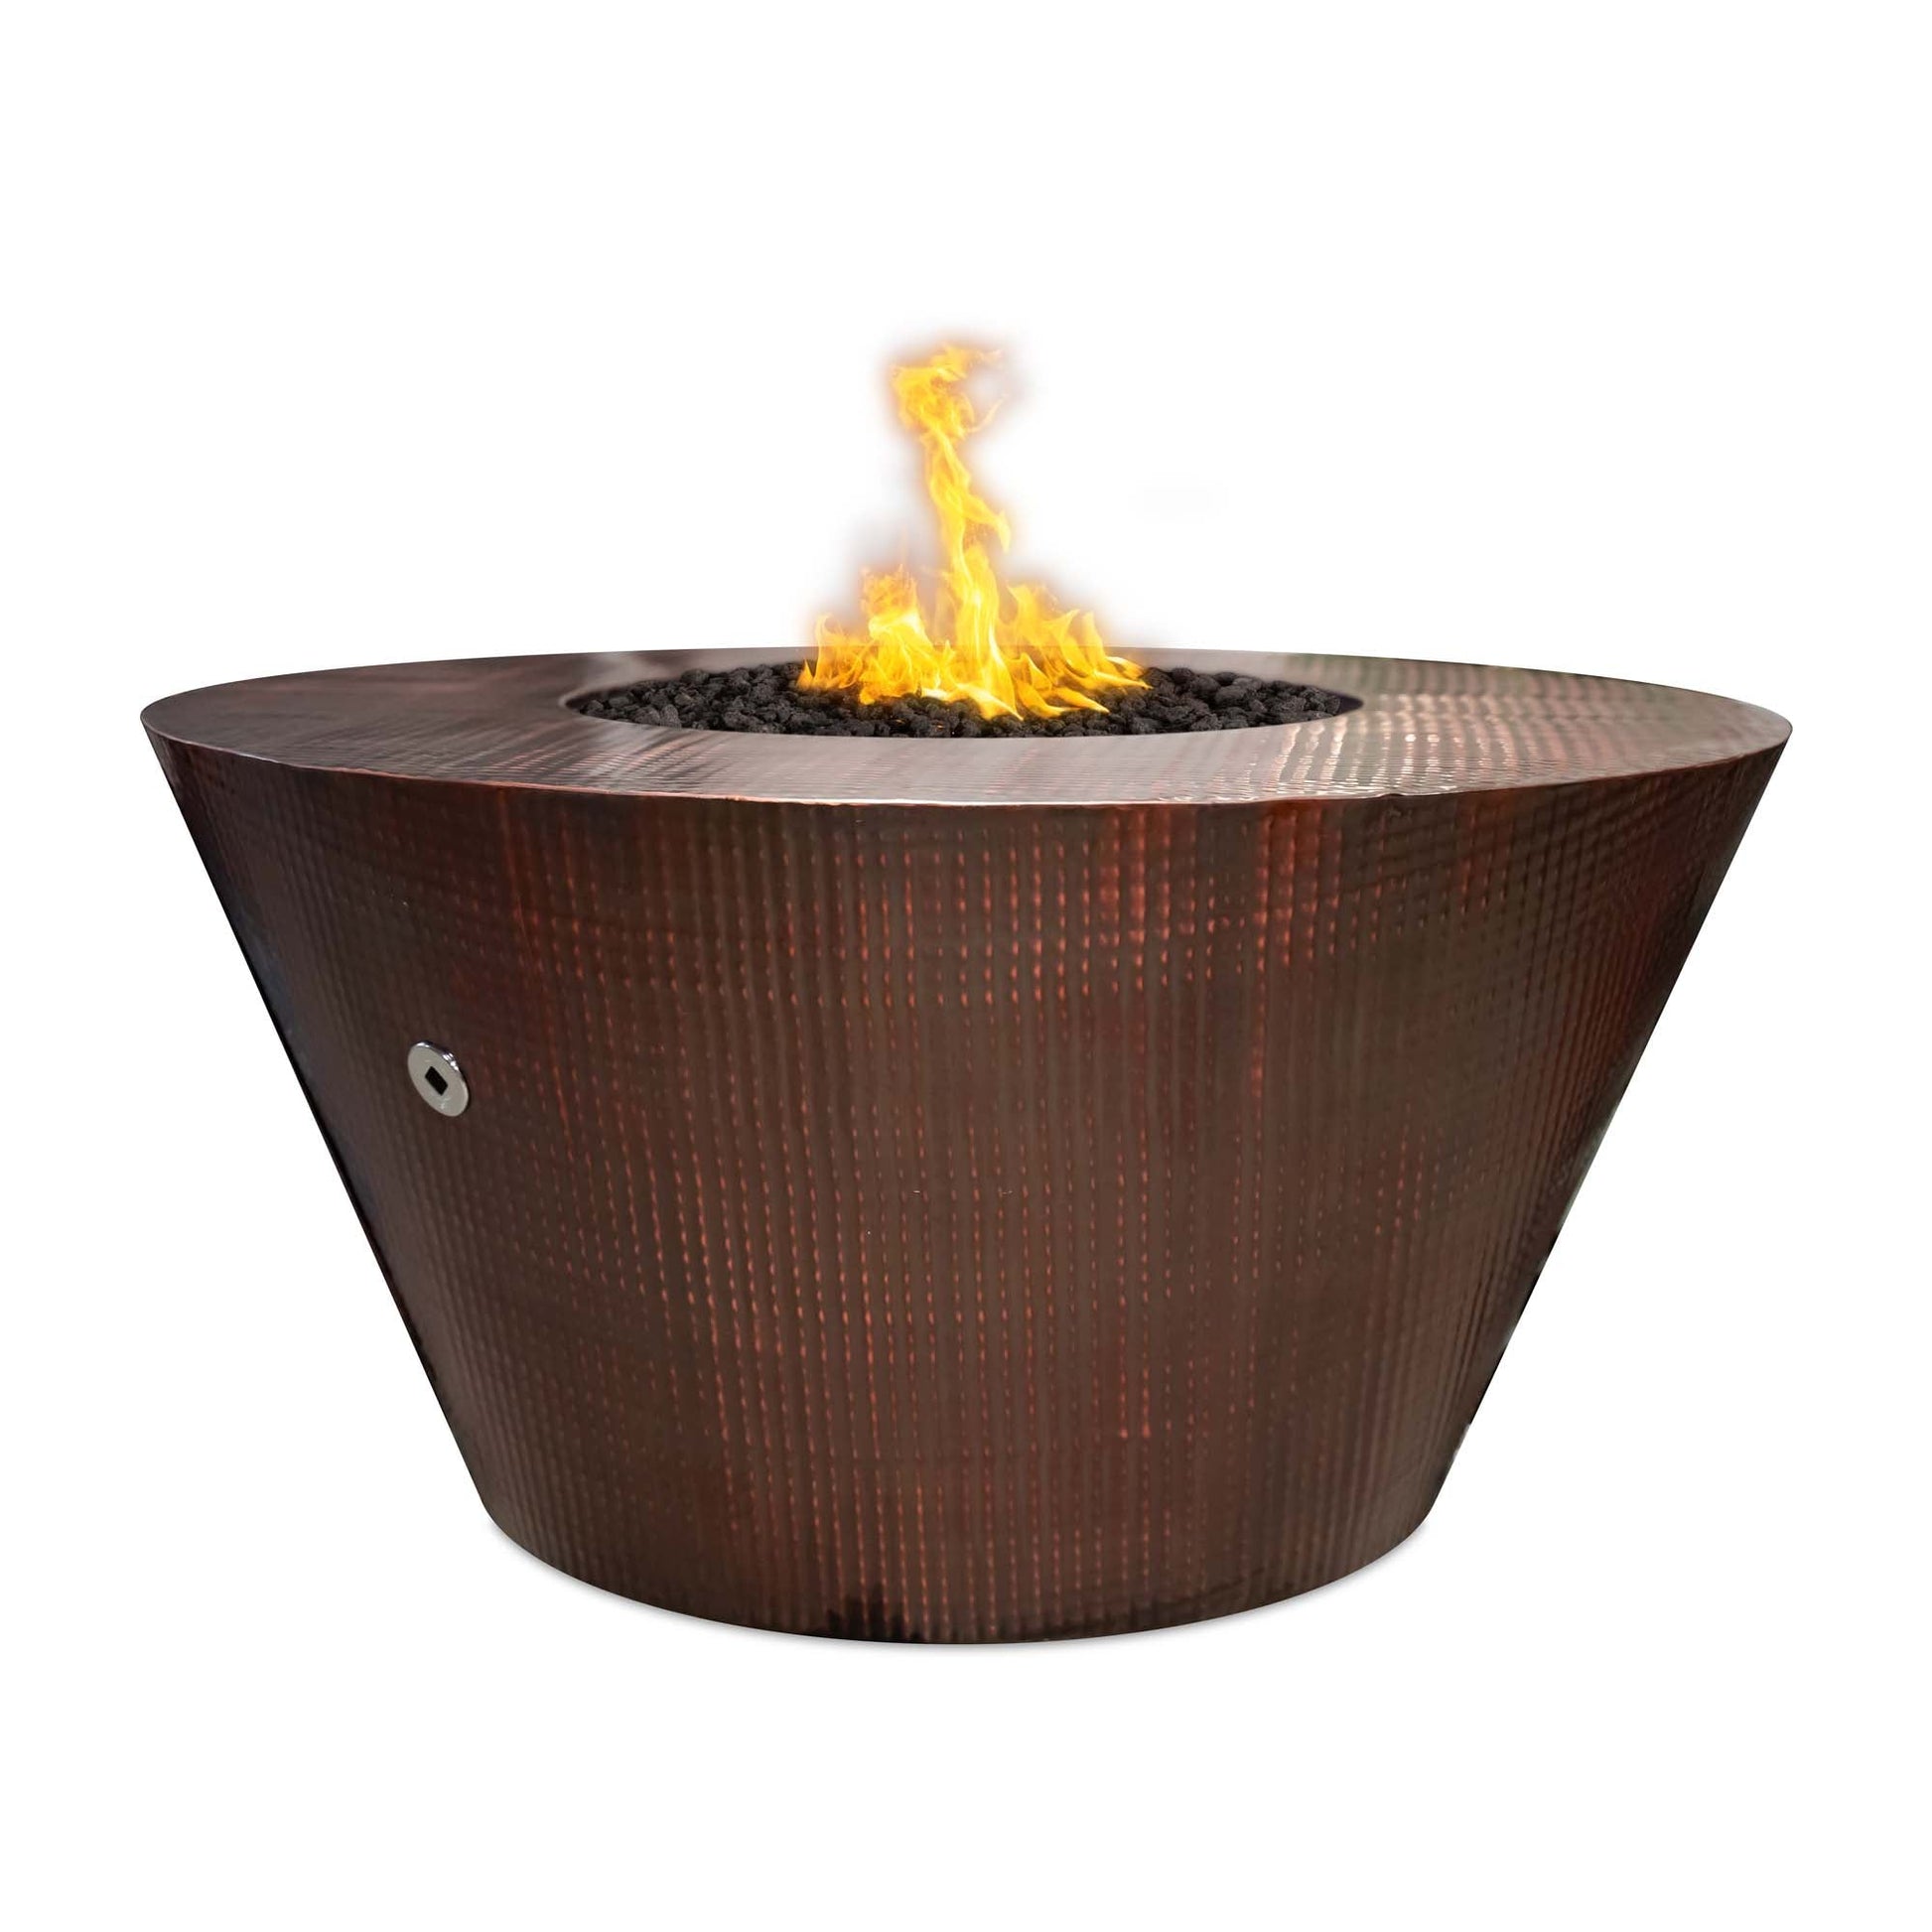 The Outdoor Plus Round Martillo 48" Java Powder Coated Metal Liquid Propane Fire Pit with Flame Sense with Spark Ignition